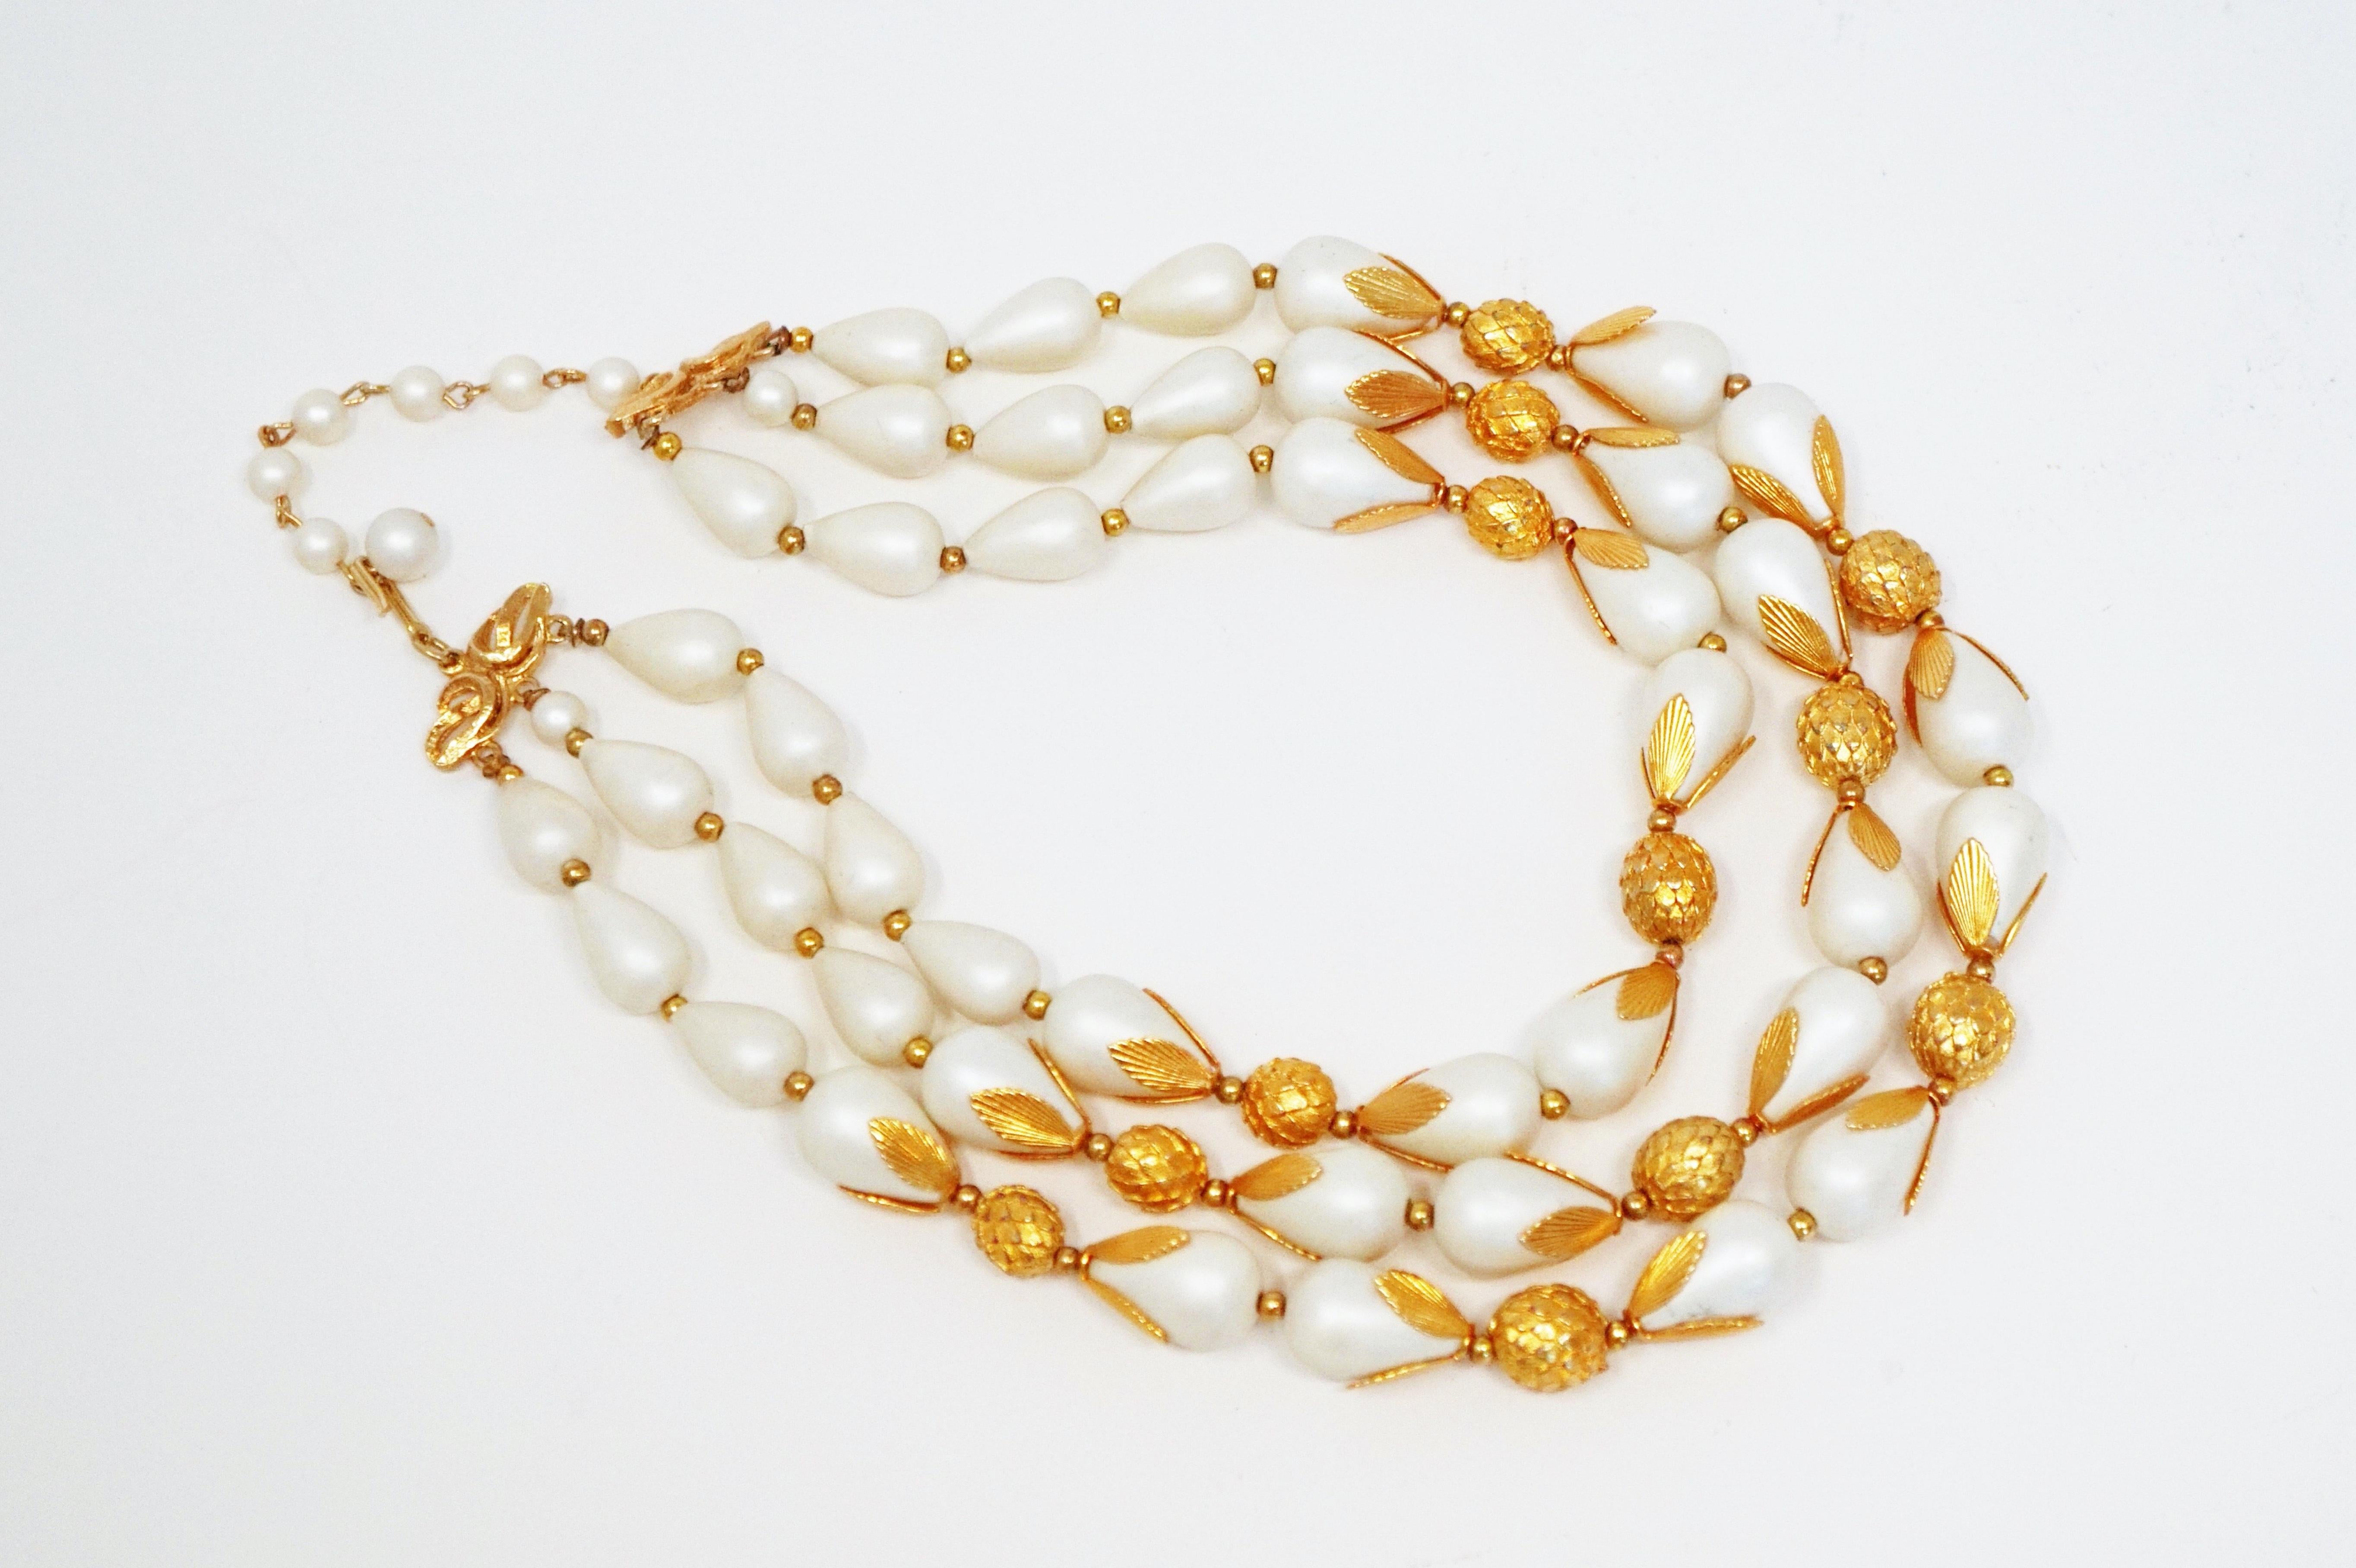 Triple Strand Gilt Costume Statement Necklace by Deauville, Signed, circa 1950 For Sale 3